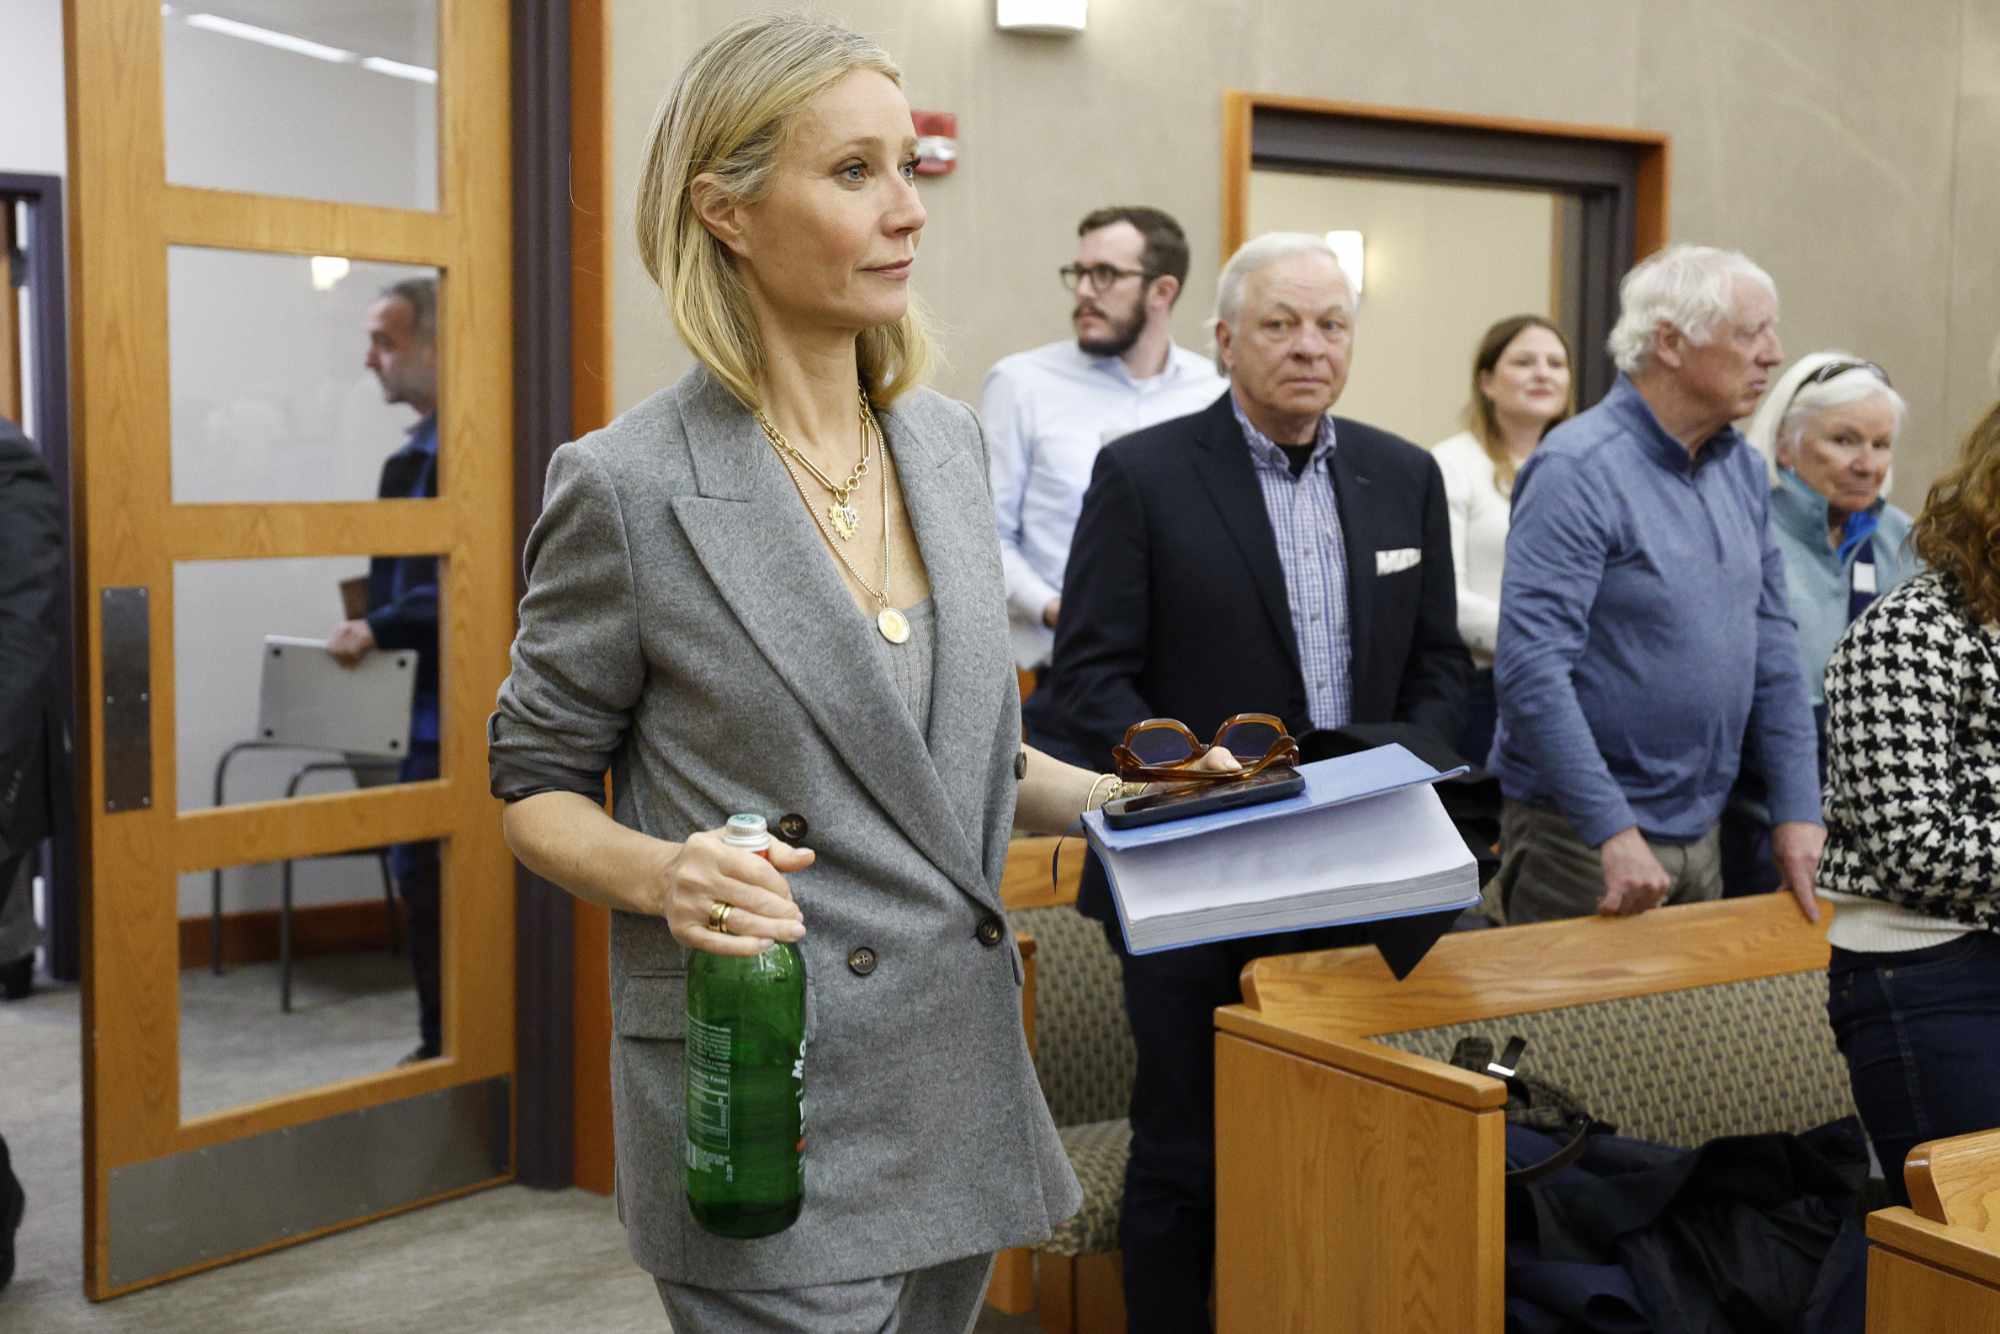 Gwyneth Paltrow enters a Utah courtroom in a grey suit